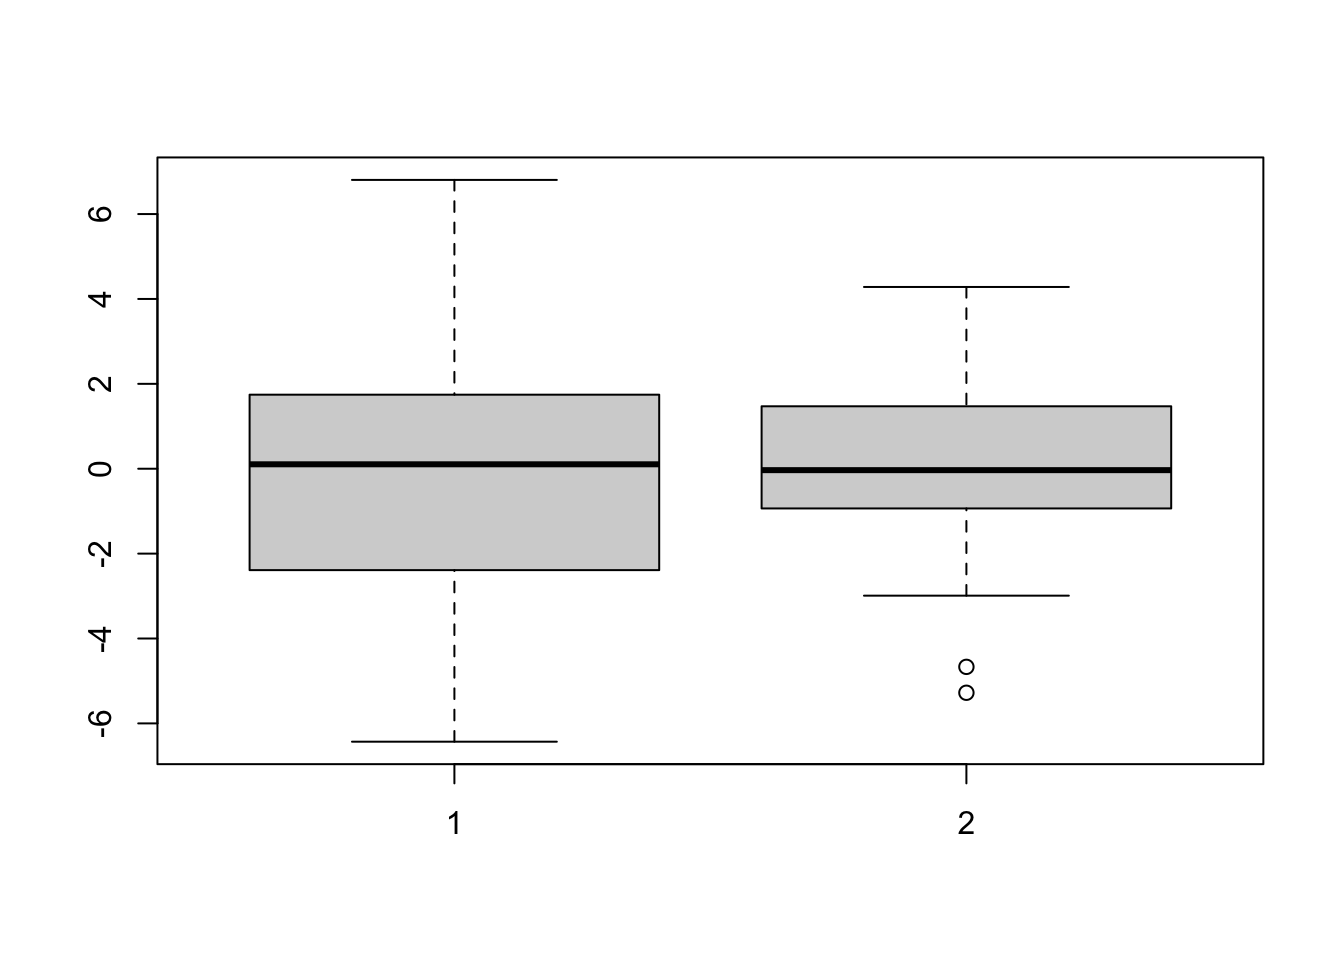 Boxplots of data from distributions with different variances.